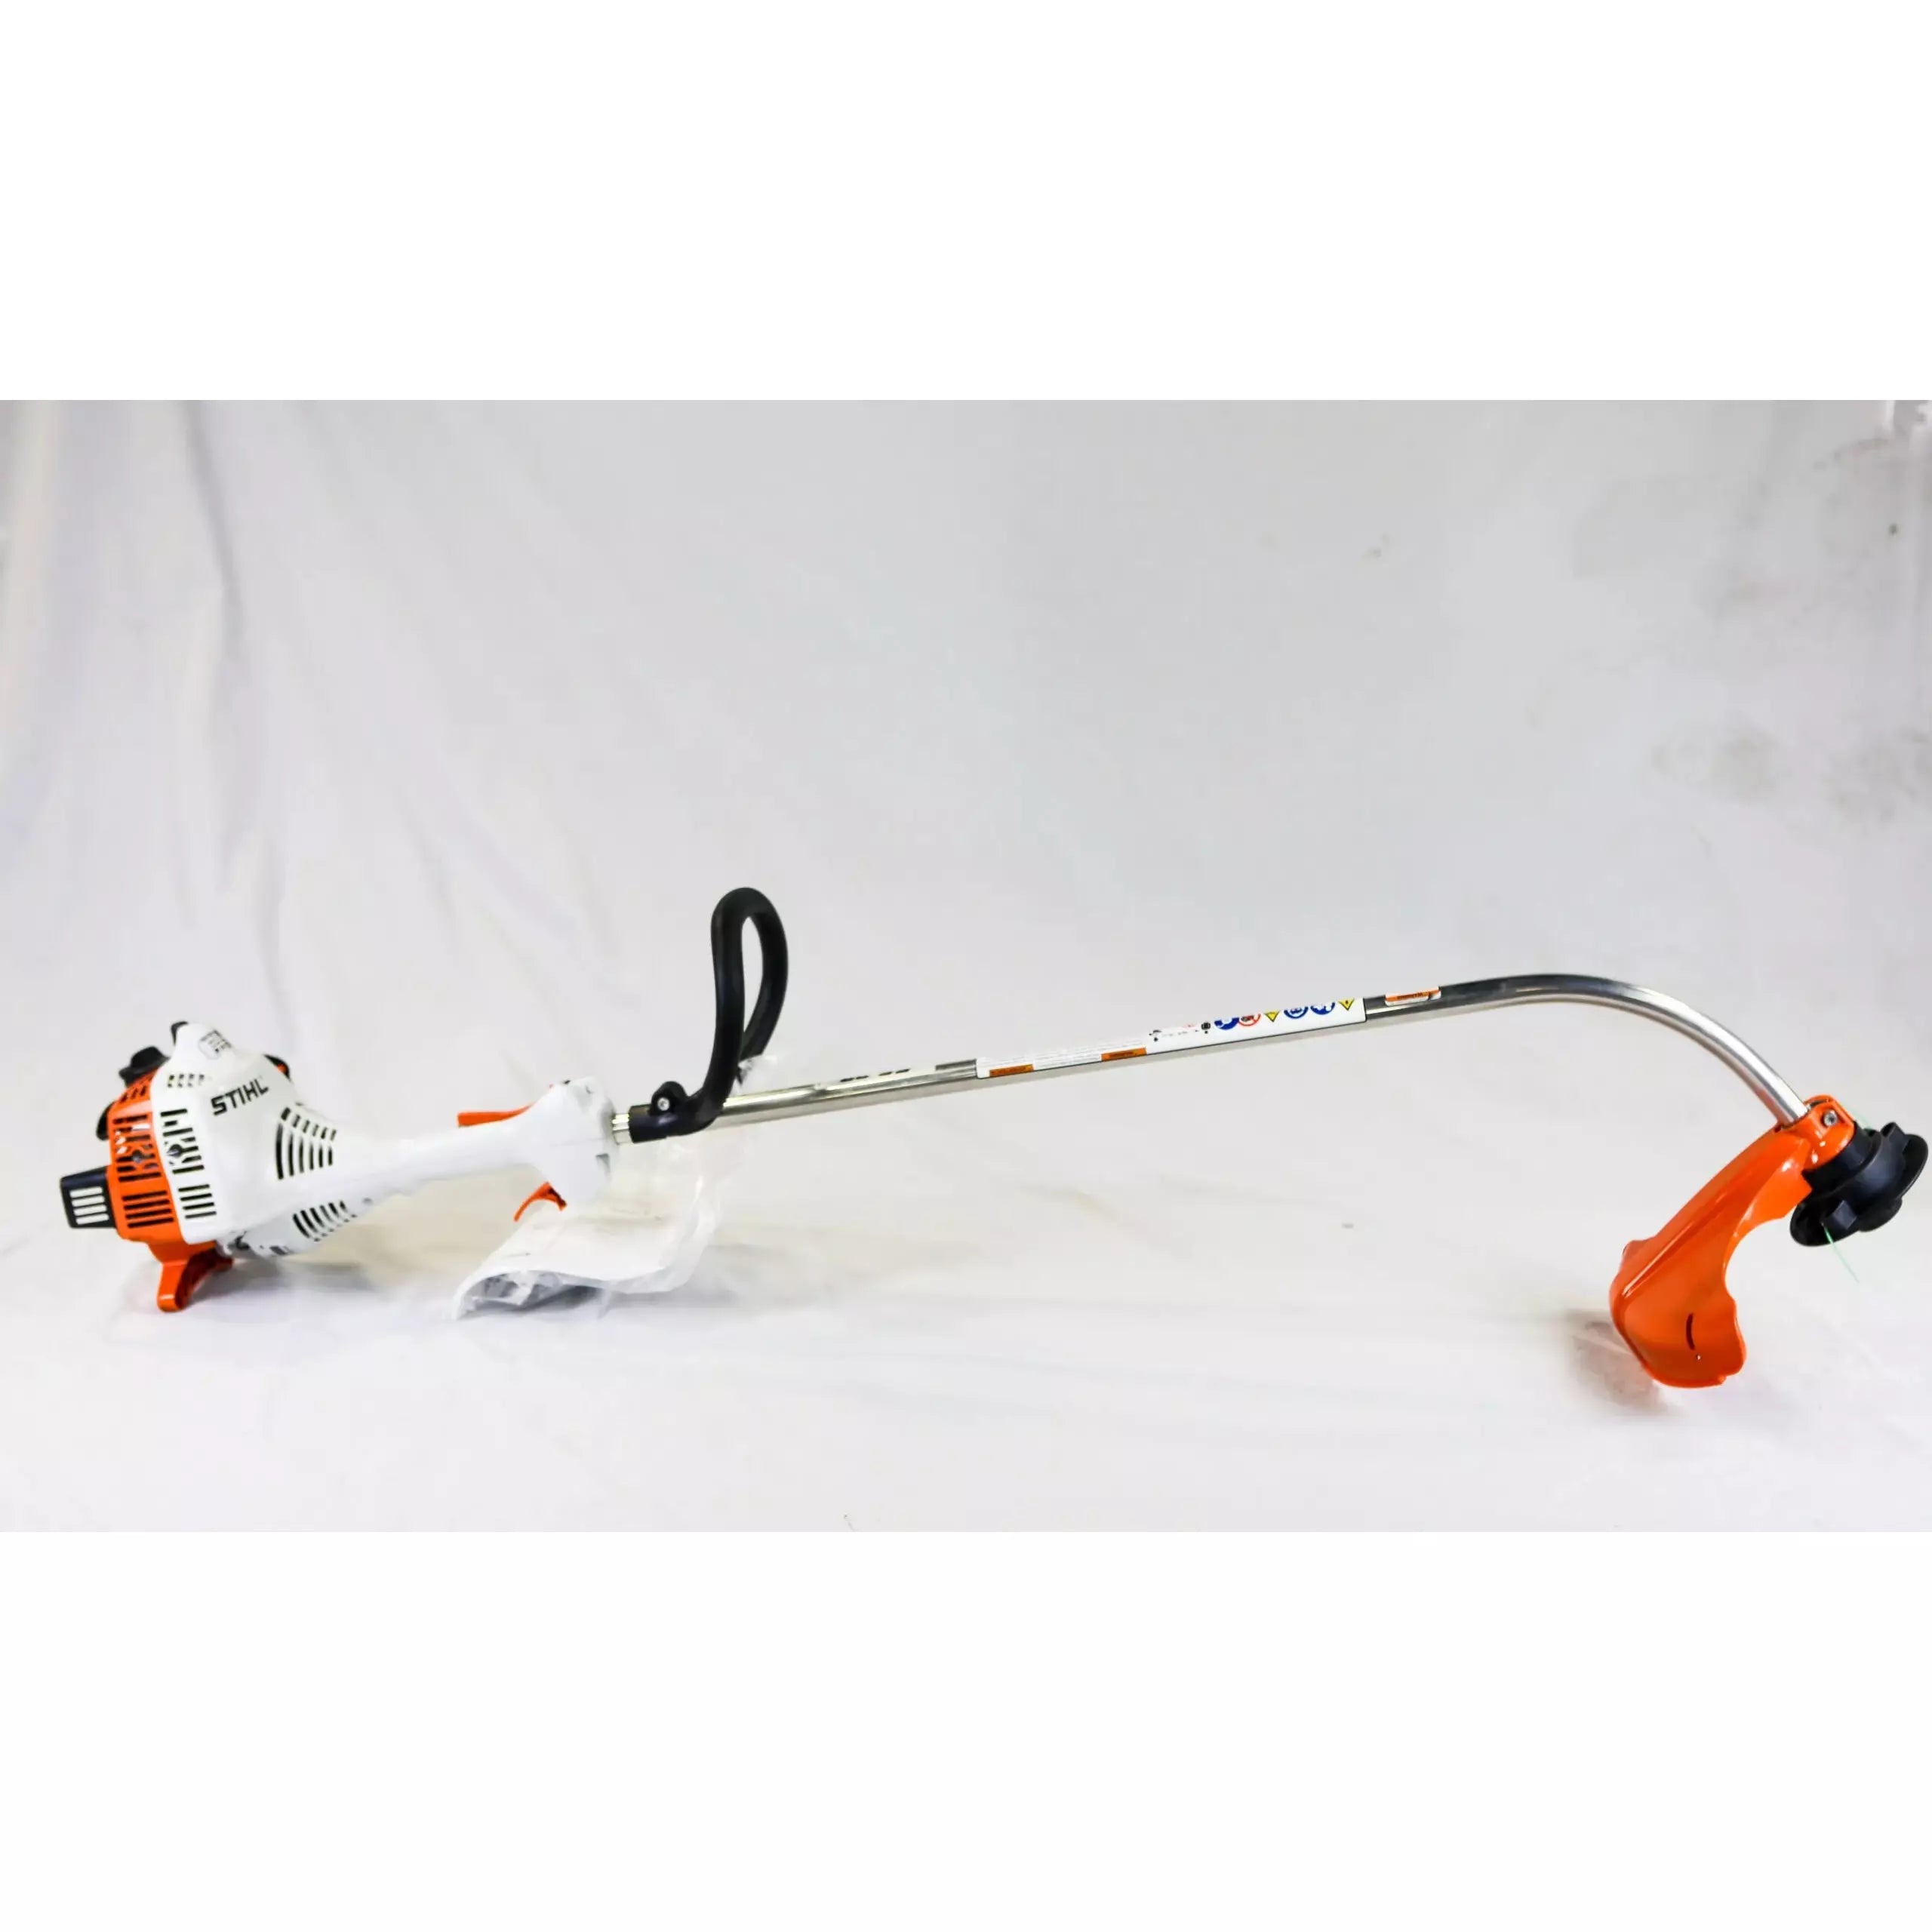 FS 38 Lightweight Grass and Weed String Trimmer